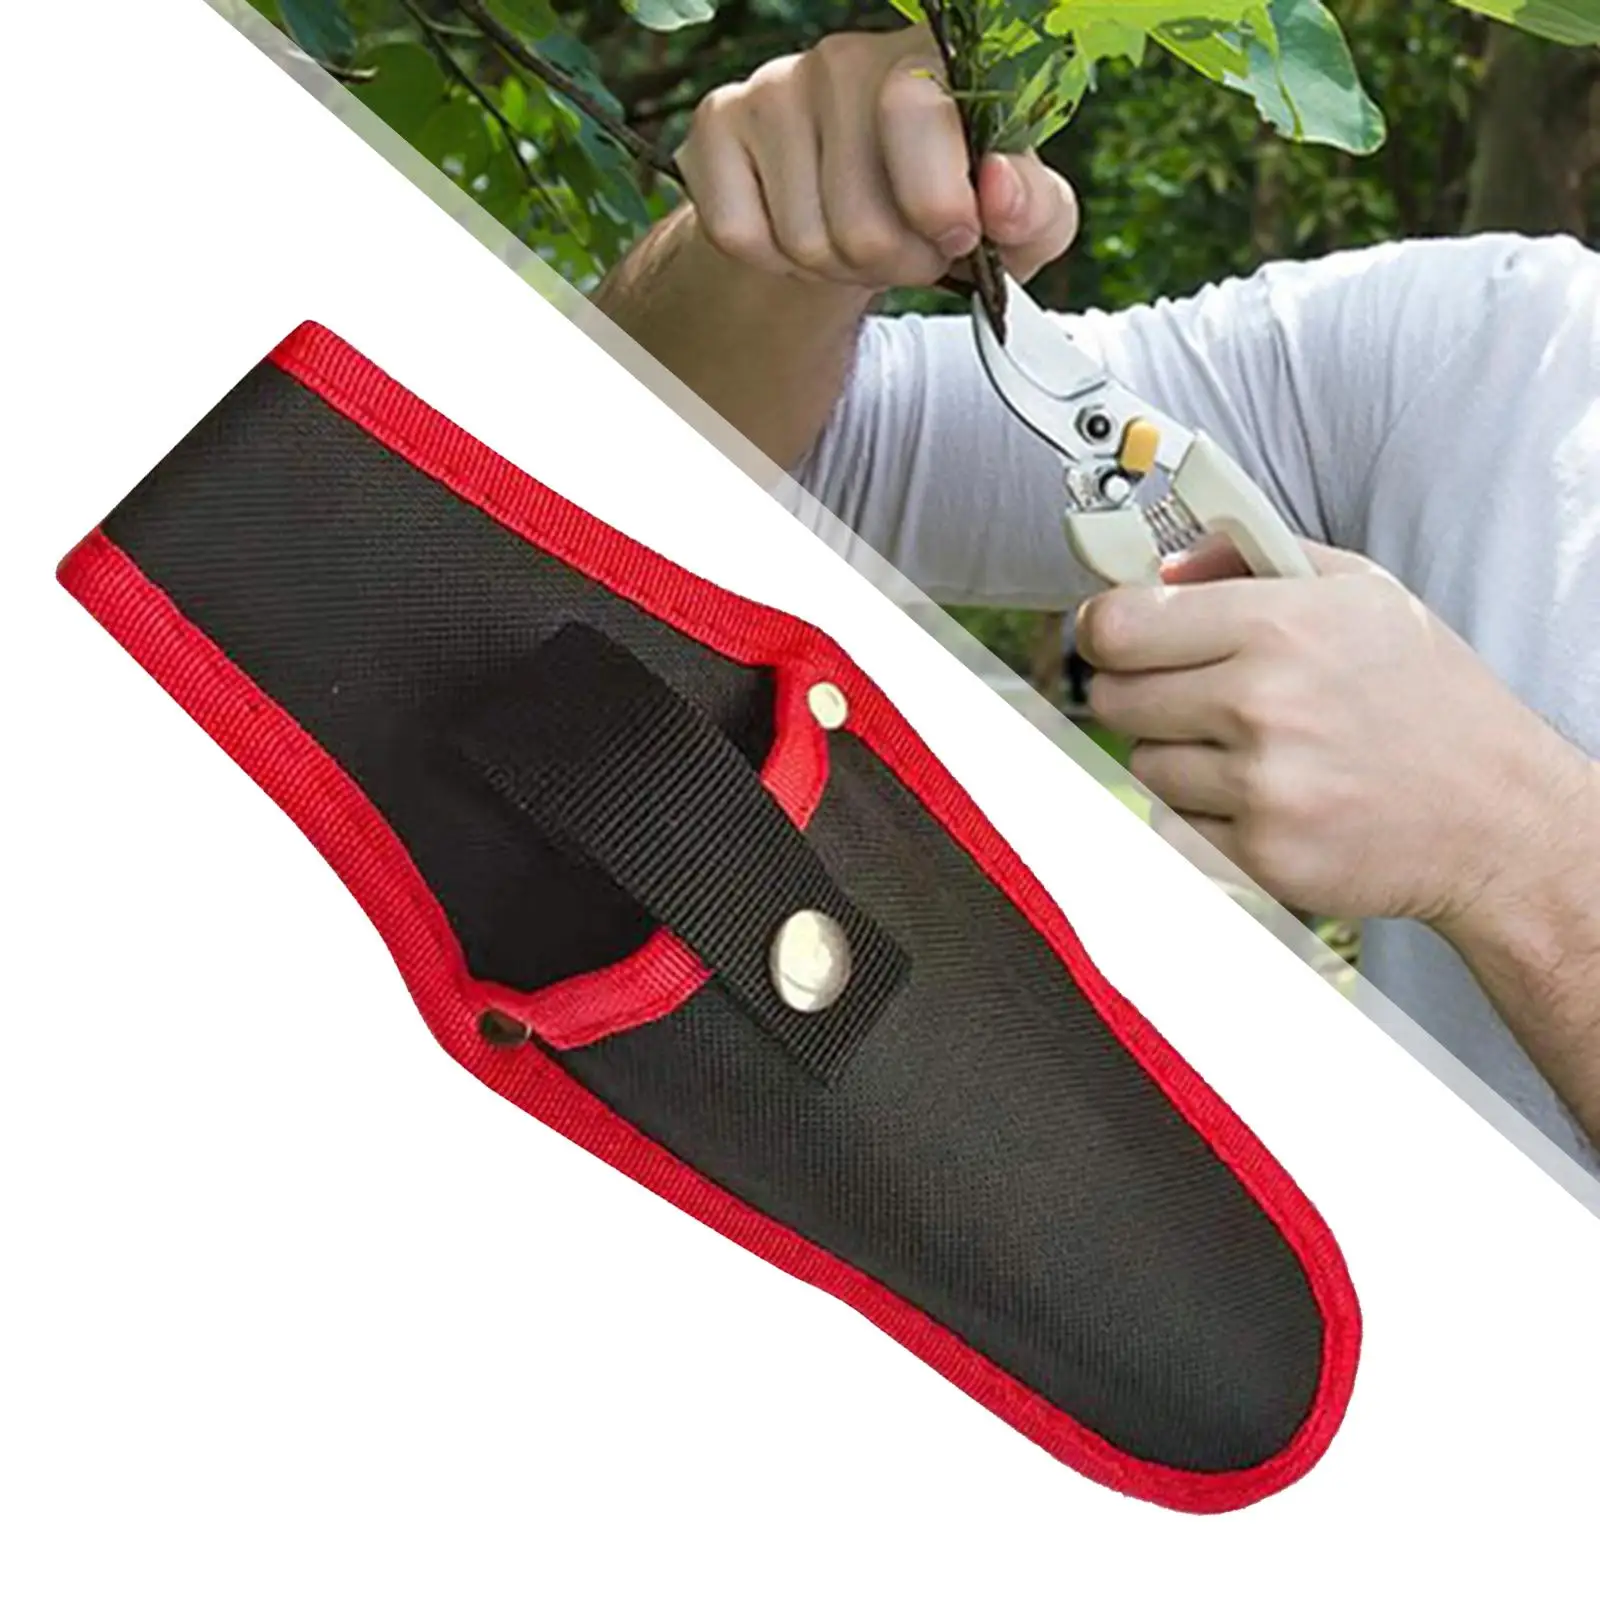 Pruner Sheath Tool Belt Accessory Pouch Pruning Shear Holster for Pliers Shears Scissors Electrician Plant Shear Trimming Tools